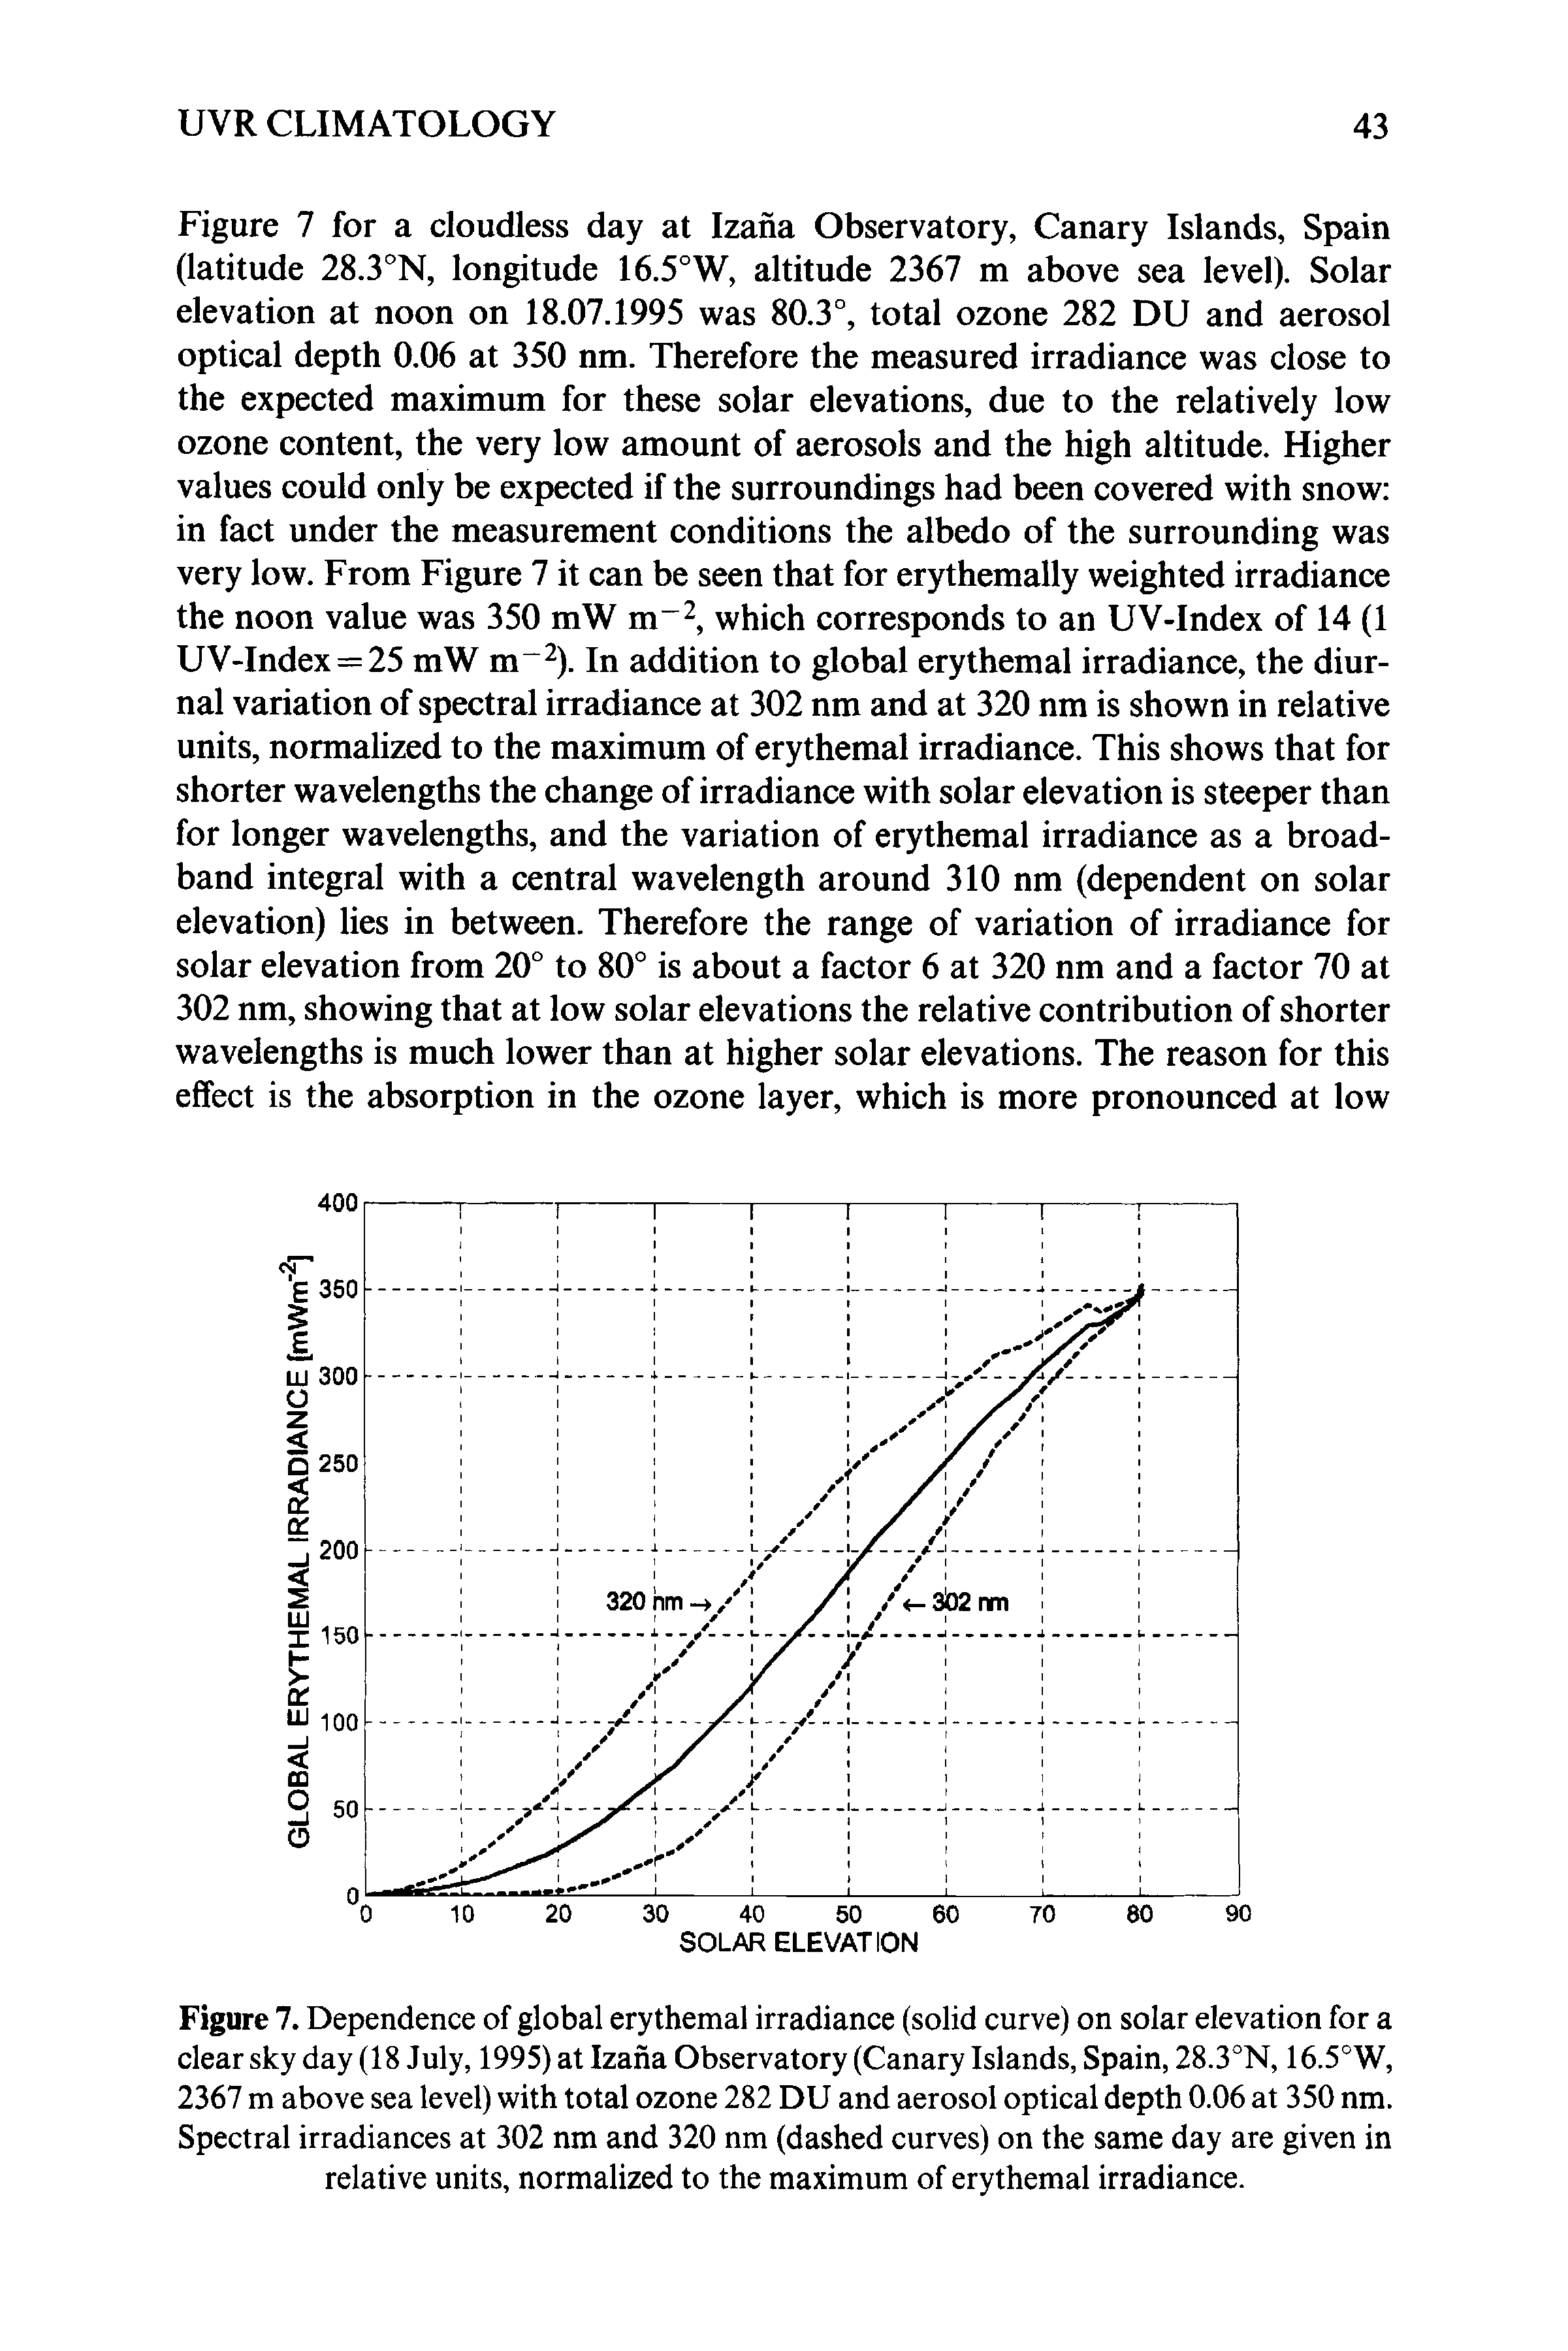 Figure 7. Dependence of global erythemal irradiance (solid curve) on solar elevation for a clear sky day (18 July, 1995) at Izana Observatory (Canary Islands, Spain, 28.3°N, 16.5°W, 2367 m above sea level) with total ozone 282 DU and aerosol optical depth 0.06 at 350 nm. Spectral irradiances at 302 nm and 320 nm (dashed curves) on the same day are given in relative units, normalized to the maximum of erythemal irradiance.